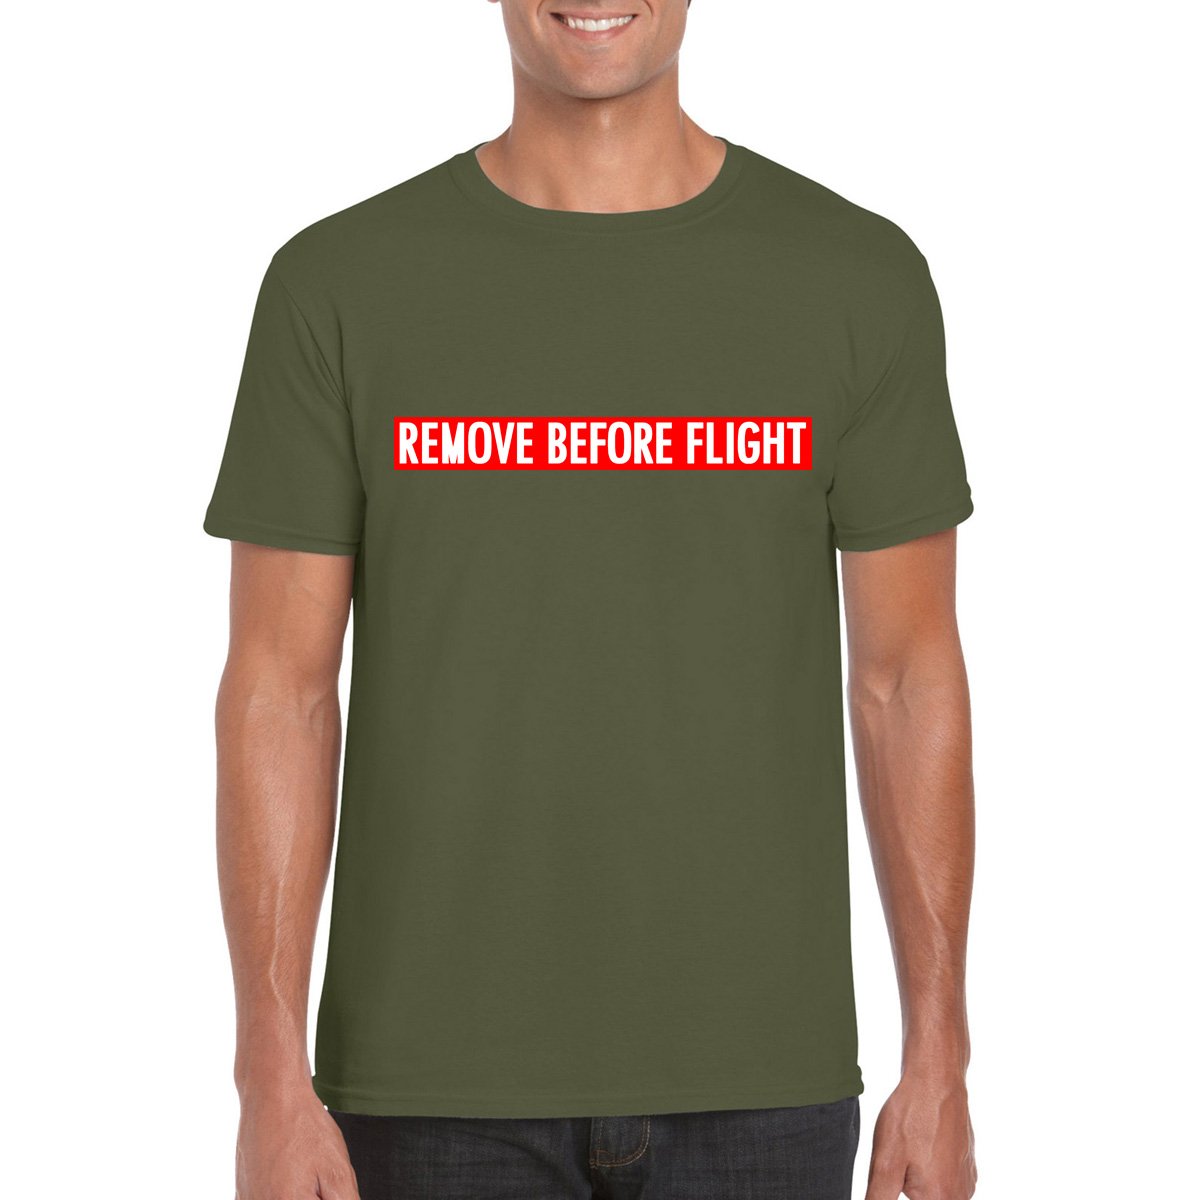 REMOVE BEFORE FLIGHT Unisex Semi-Fitted T-Shirt